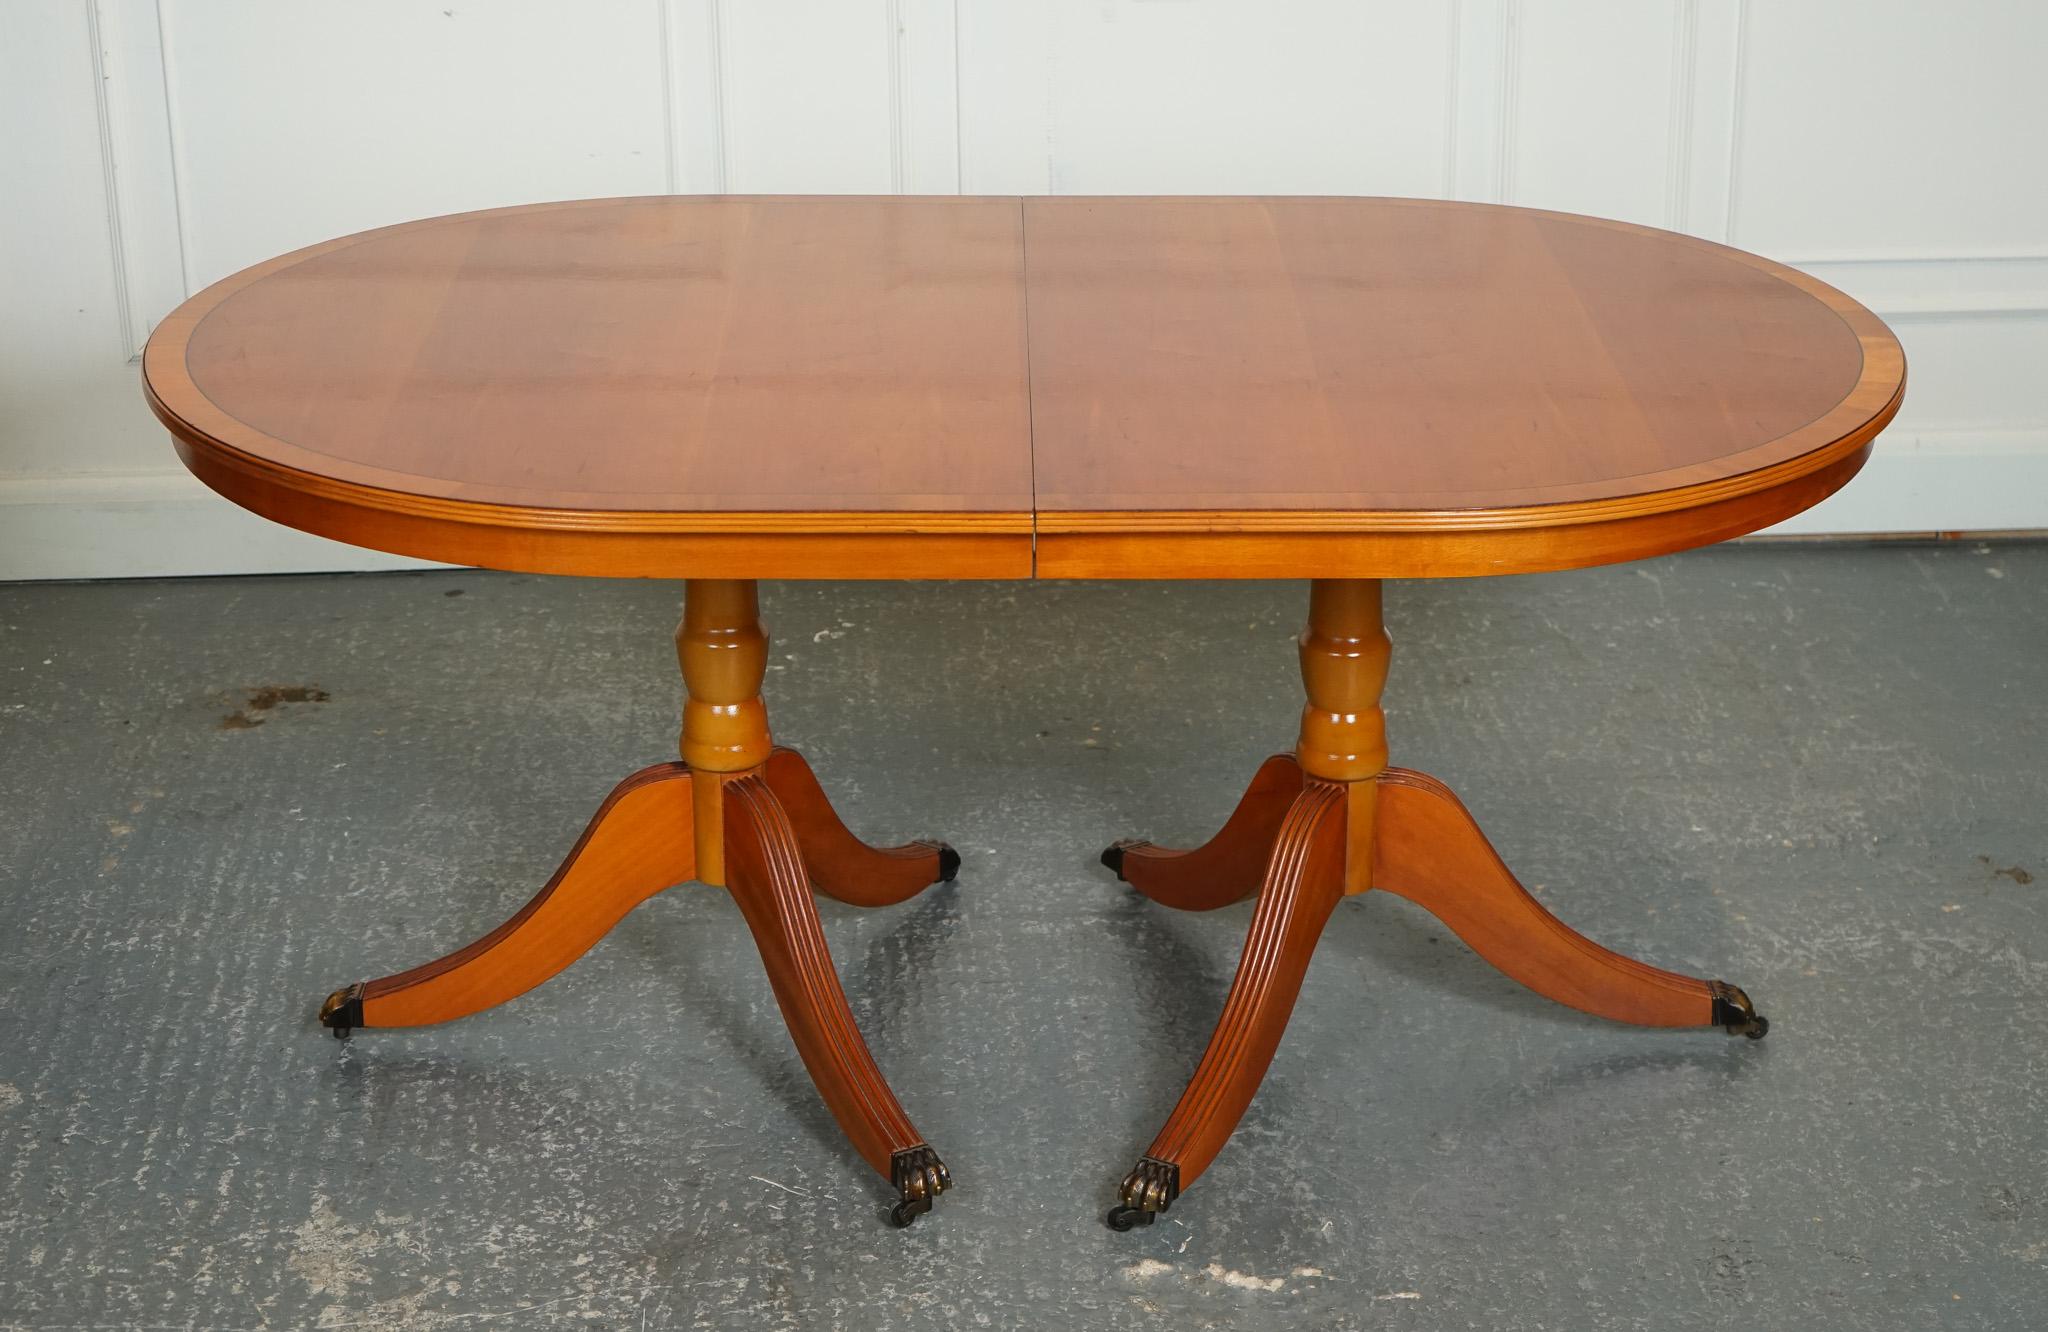 VINTAGE TWIN PEDESTAL YEW WOOD EXTENDING DINiNG TABLE 6 TO 8 Person J1 (Britisch) im Angebot